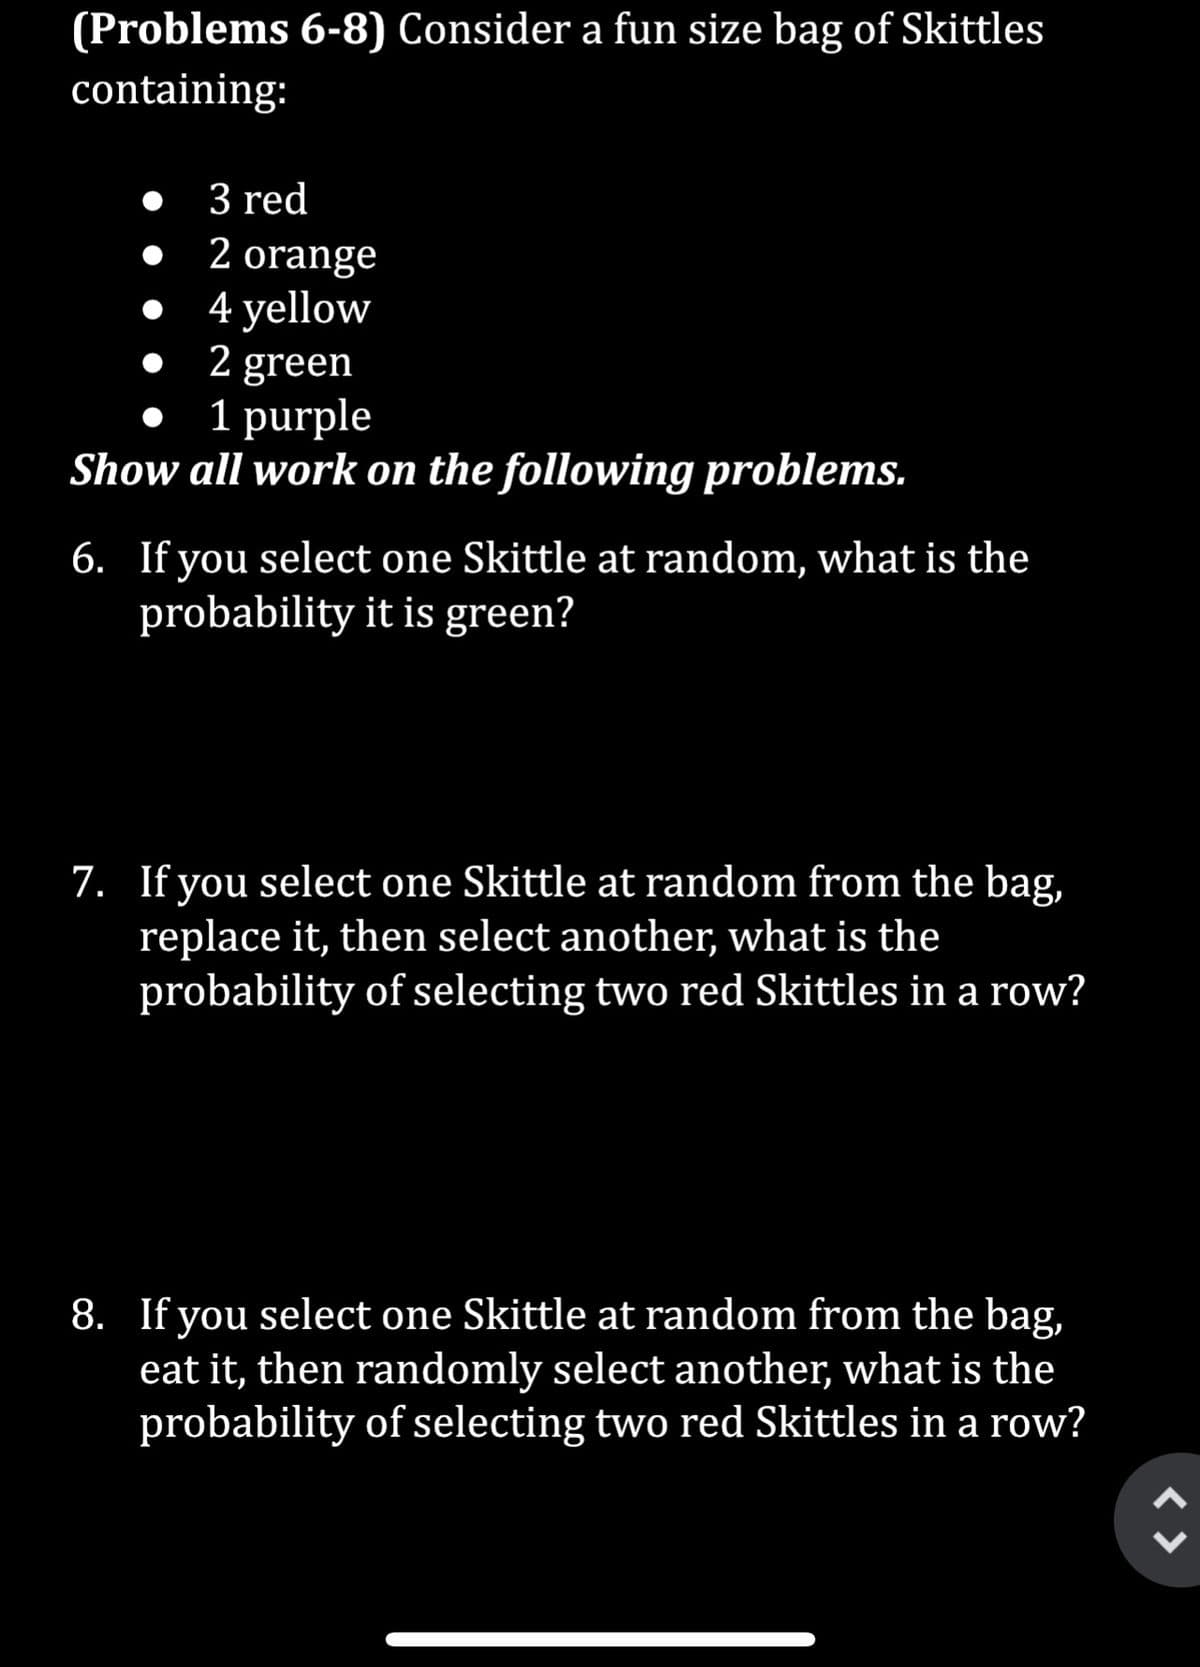 (Problems 6-8) Consider a fun size bag of Skittles
containing:
3 red
2 orange
4 yellow
2 green
1 purple
Show all work on the following problems.
•
●
6. If you select one Skittle at random, what is the
probability it is green?
7. If you select one Skittle at random from the bag,
replace it, then select another, what is the
probability of selecting two red Skittles in a row?
8. If you select one Skittle at random from the bag,
eat it, then randomly select another, what is the
probability of selecting two red Skittles in a row?
< >